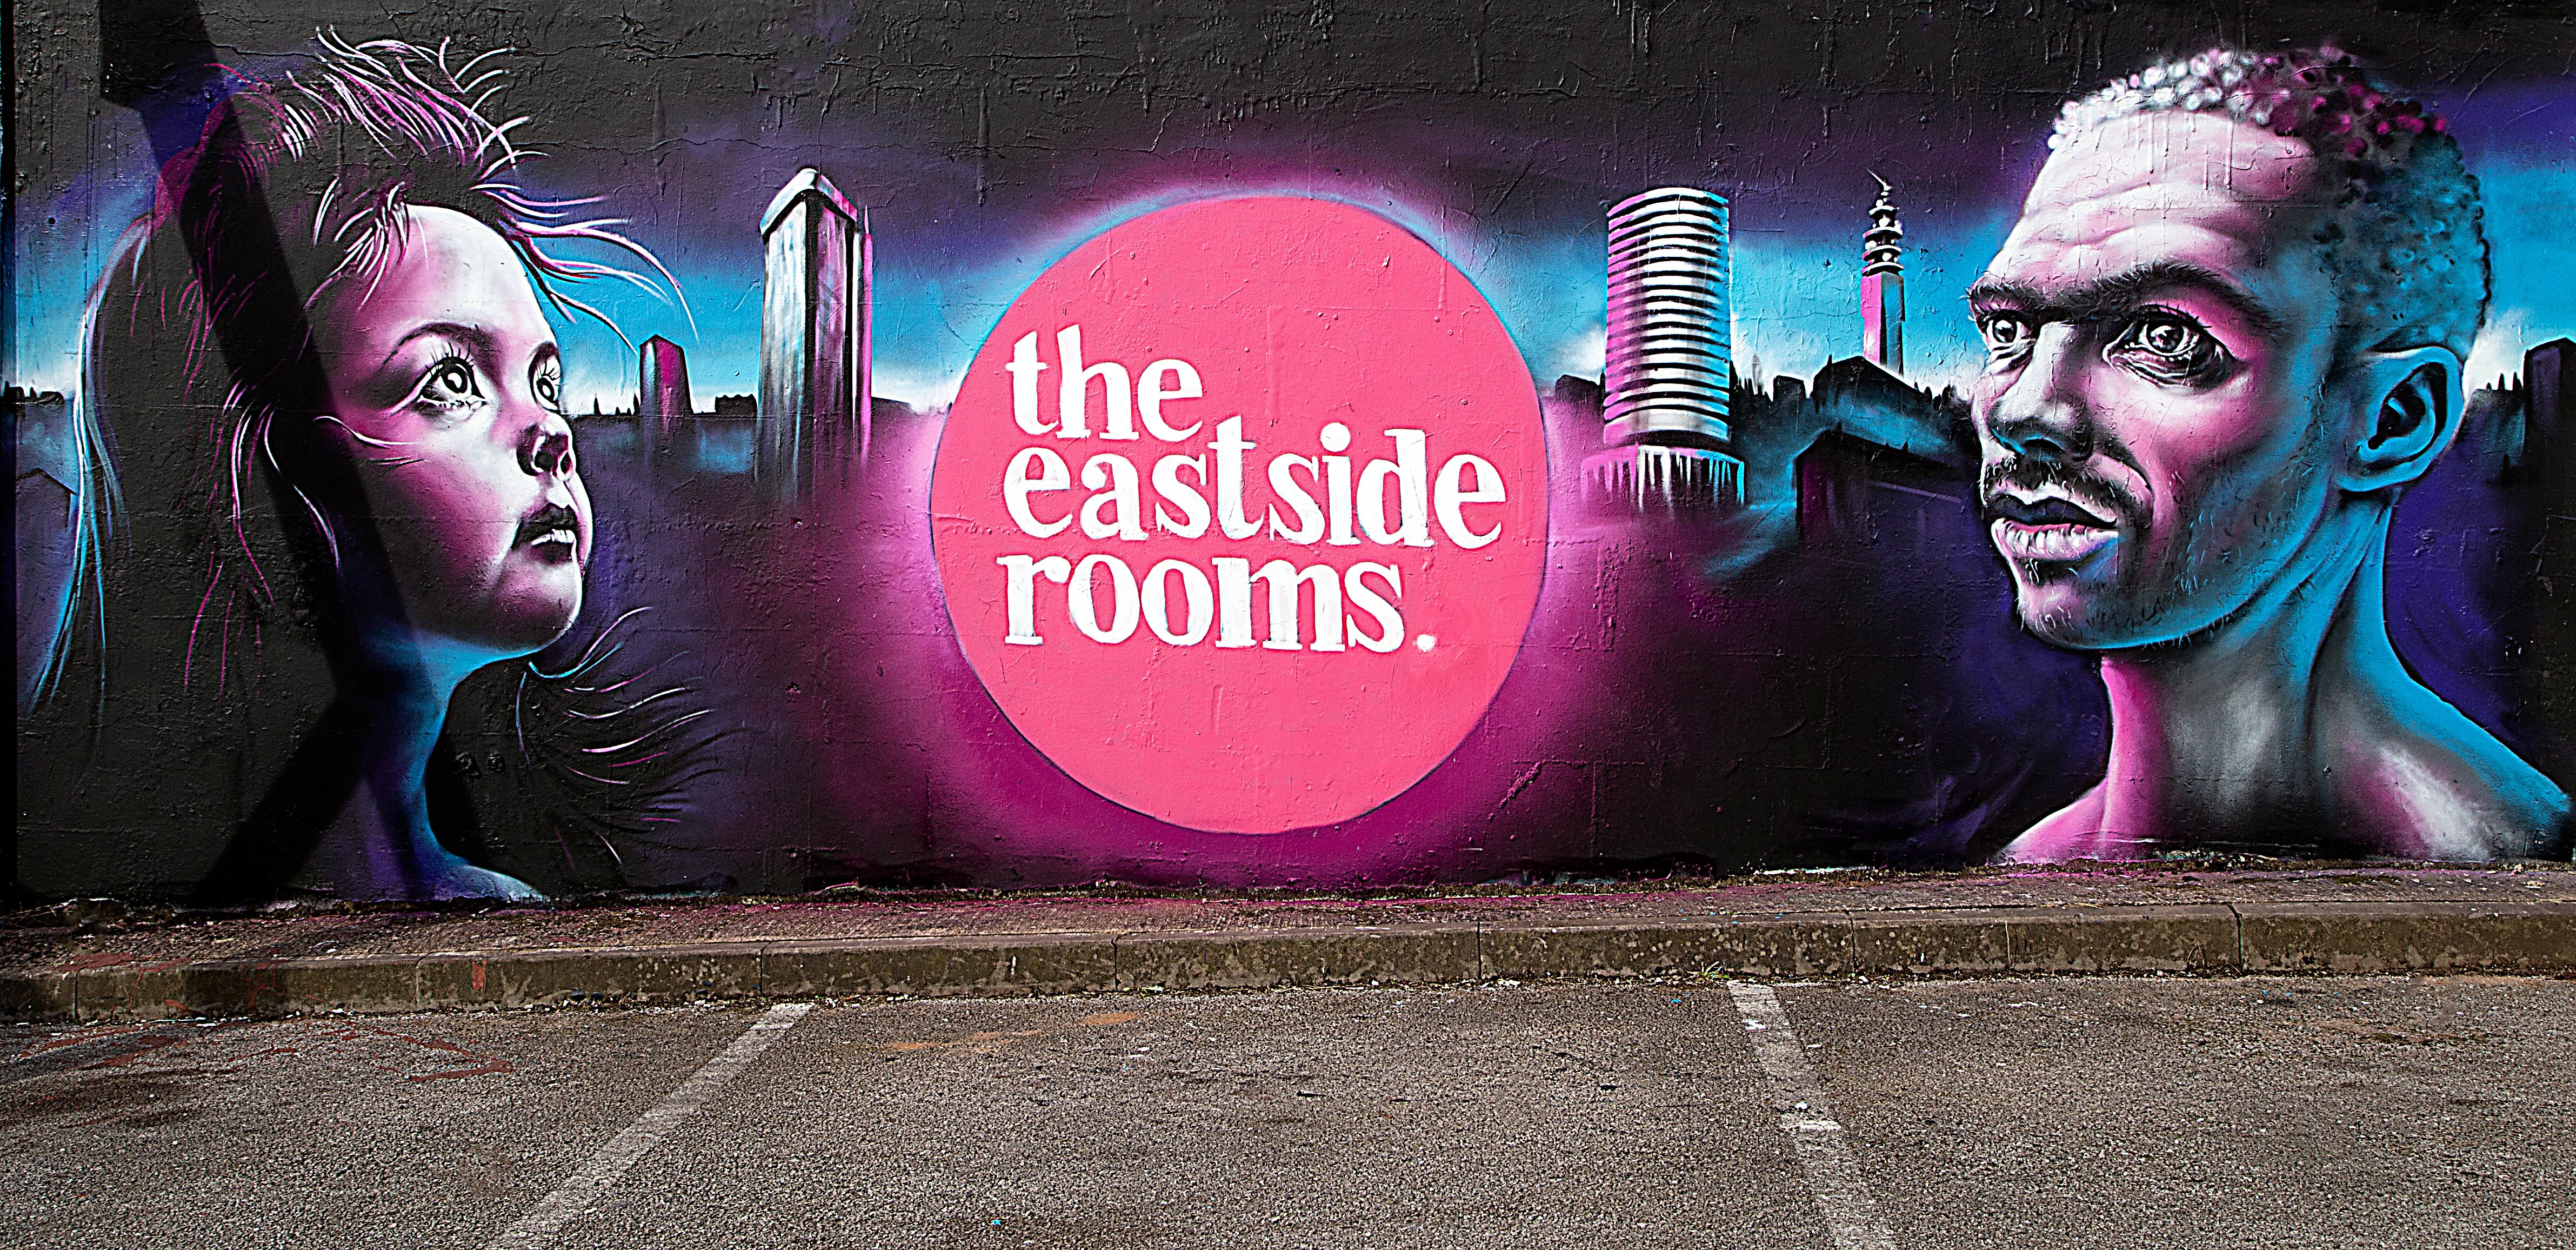 The Eastside Rooms Gos to Confex